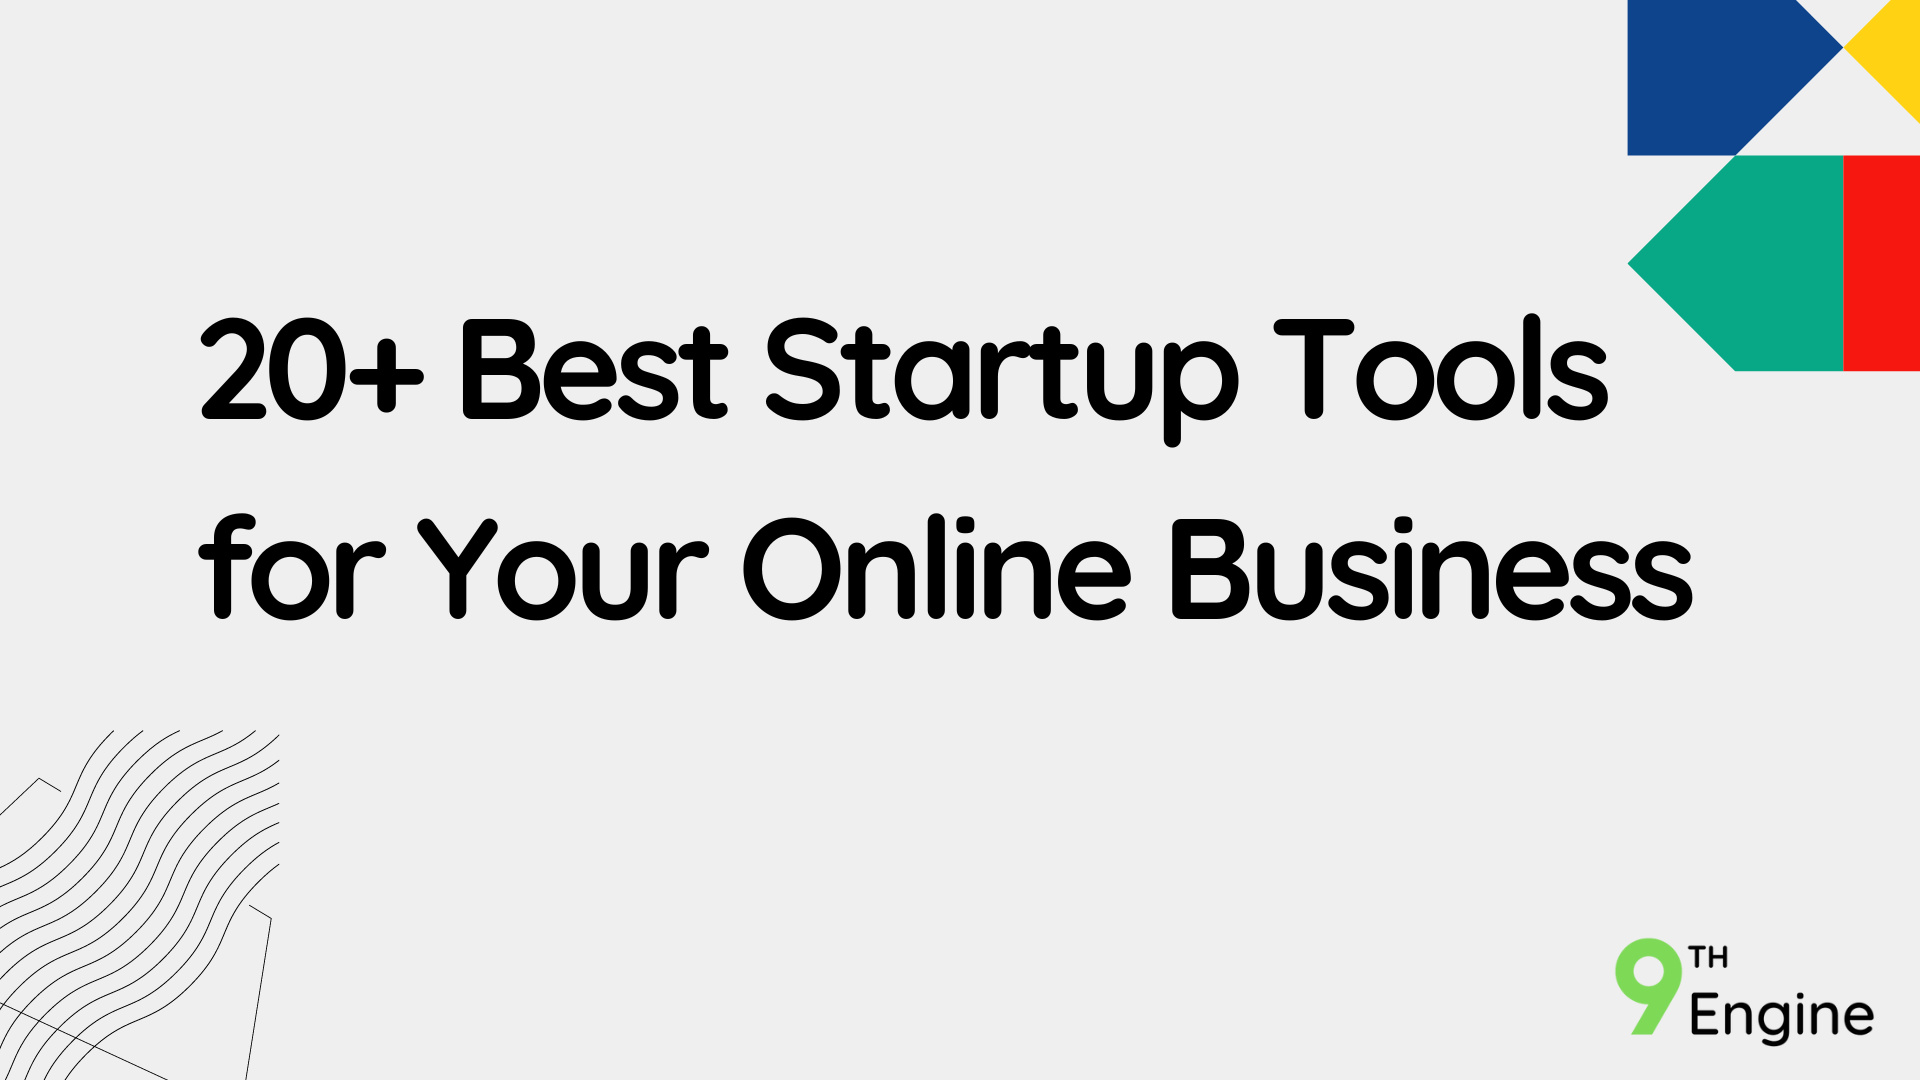 Best Startup Tools for your Online Business